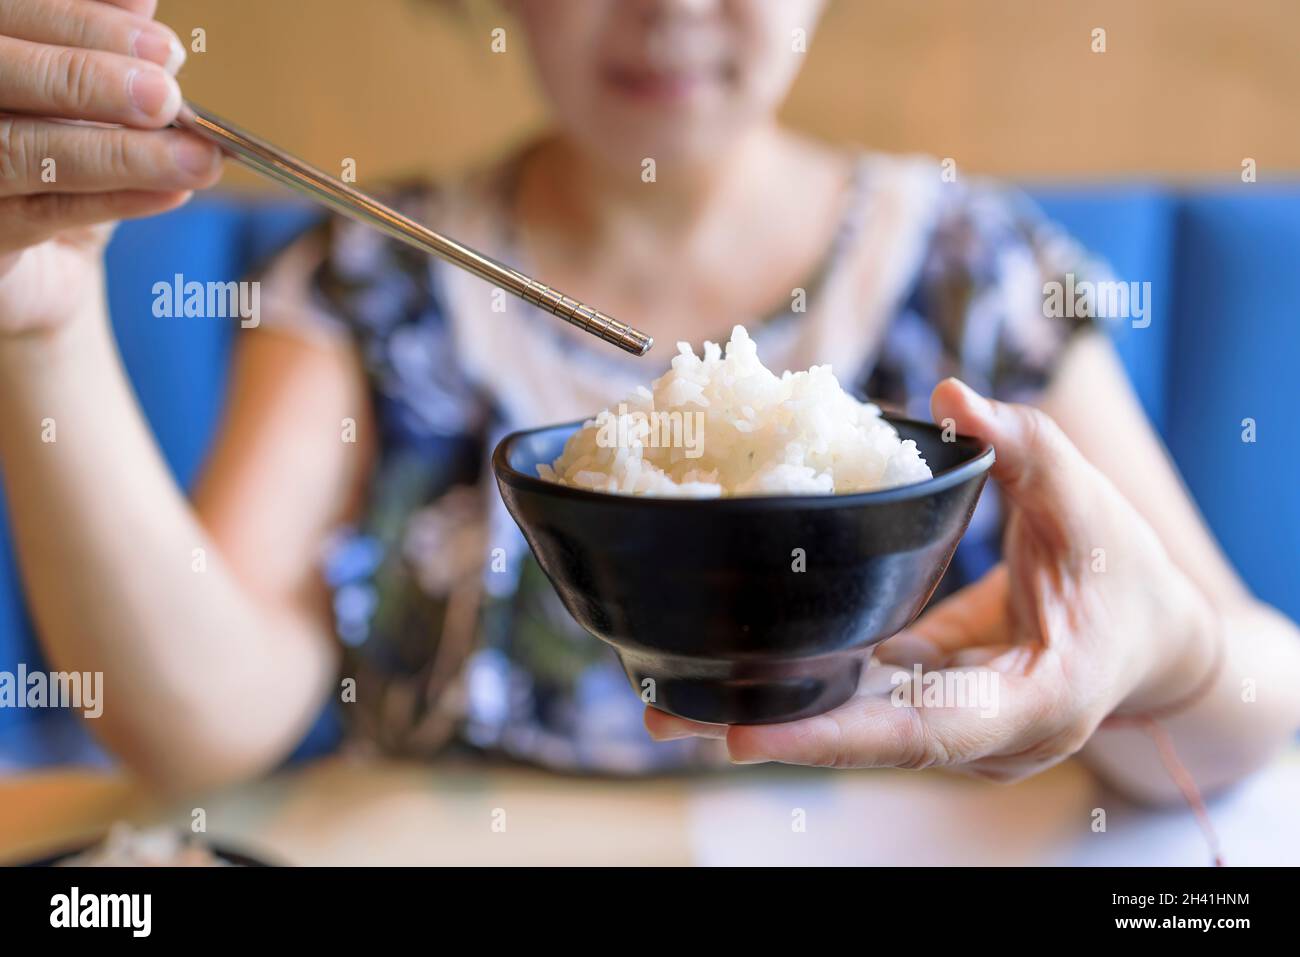 Woman hands holding Bowl of tasty cooked white rice Stock Photo